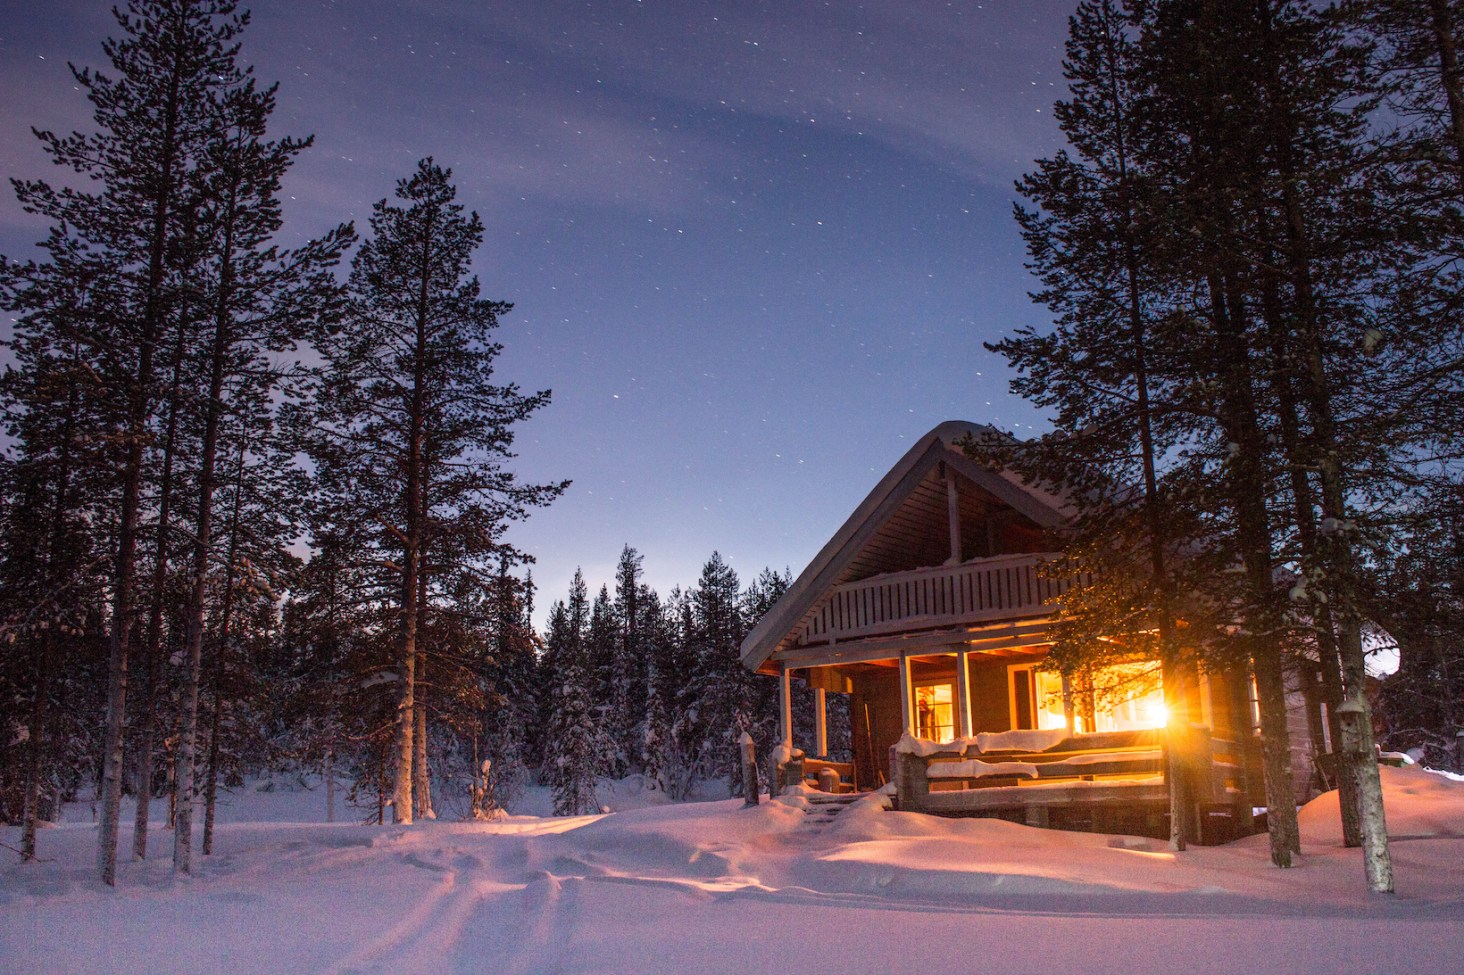 The Best Places To Rent A Cabin In The U.S. And Canada | TravelAwaits